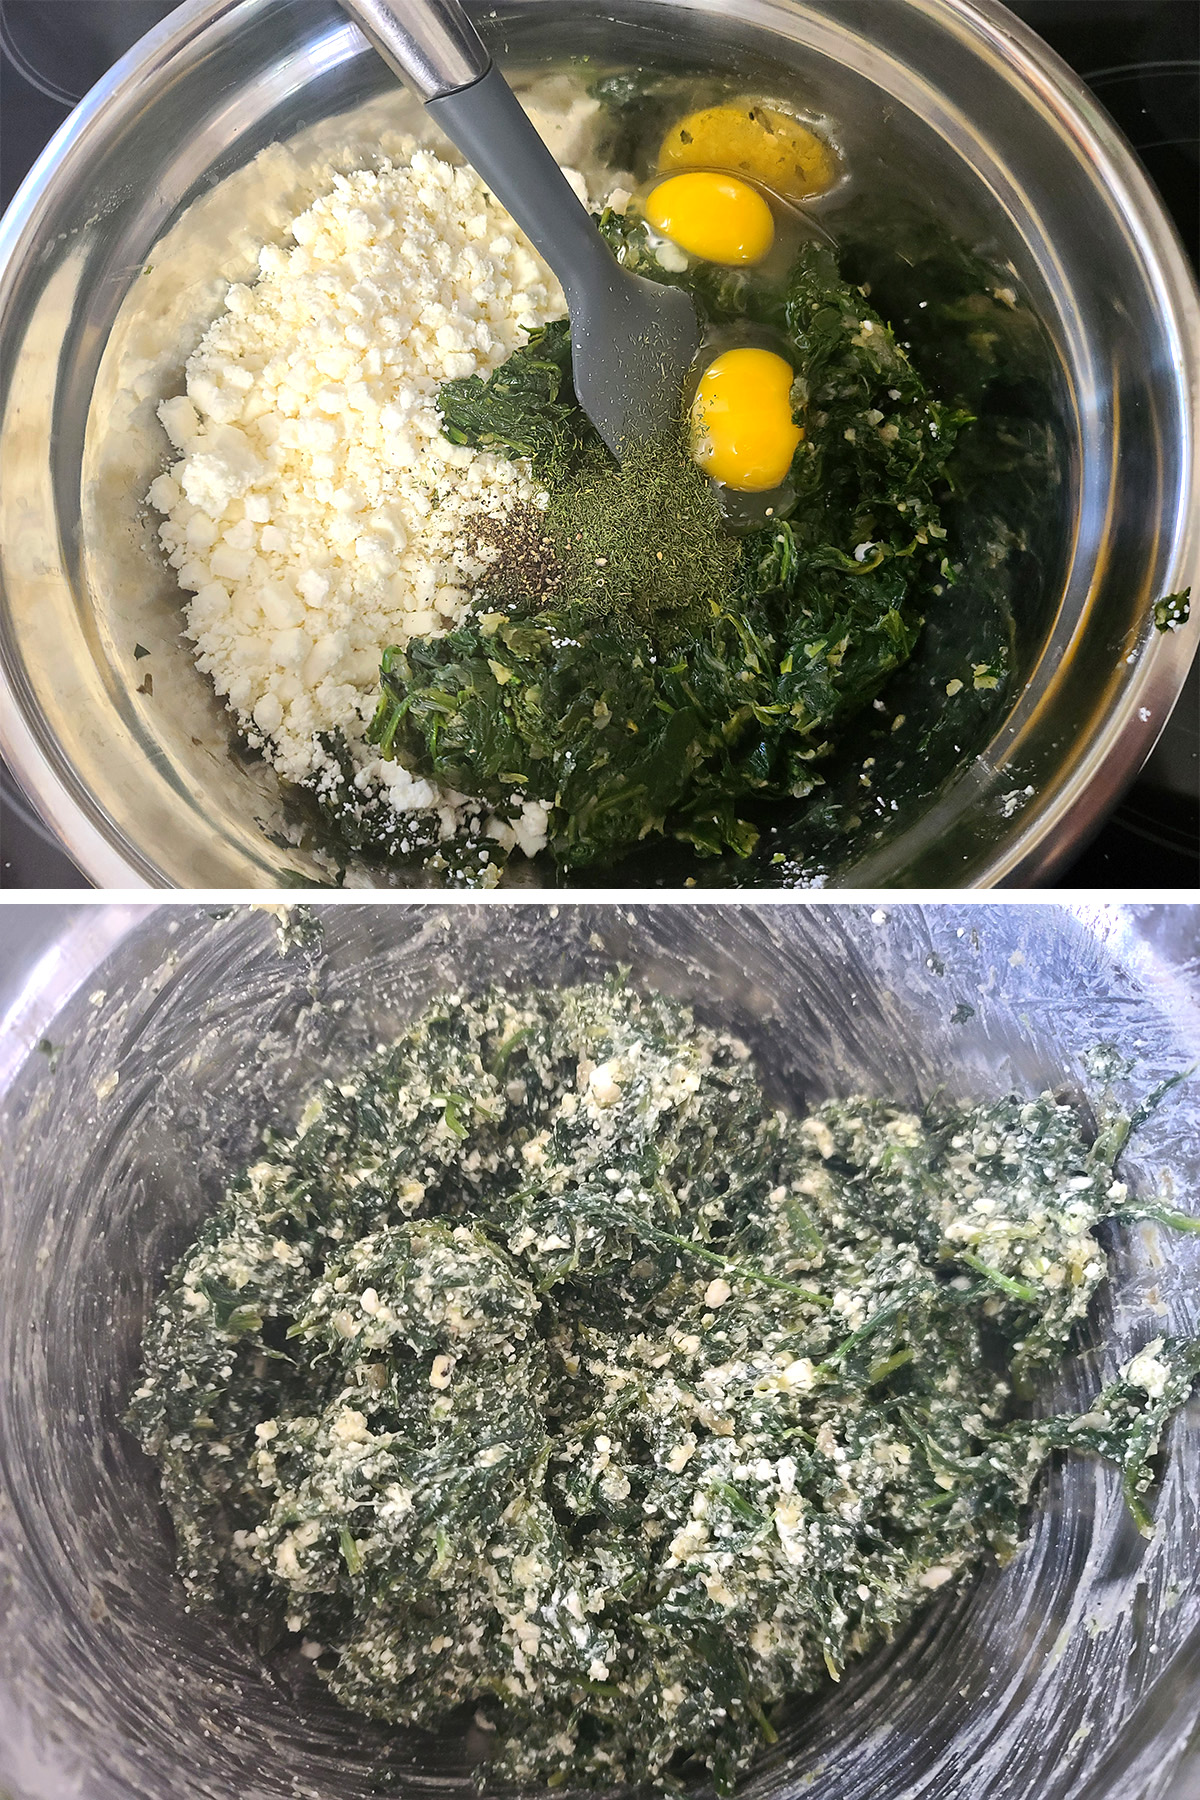 A twp part image showing spinach, feta, and eggs in a mixing bowl, before and after being mixed together.